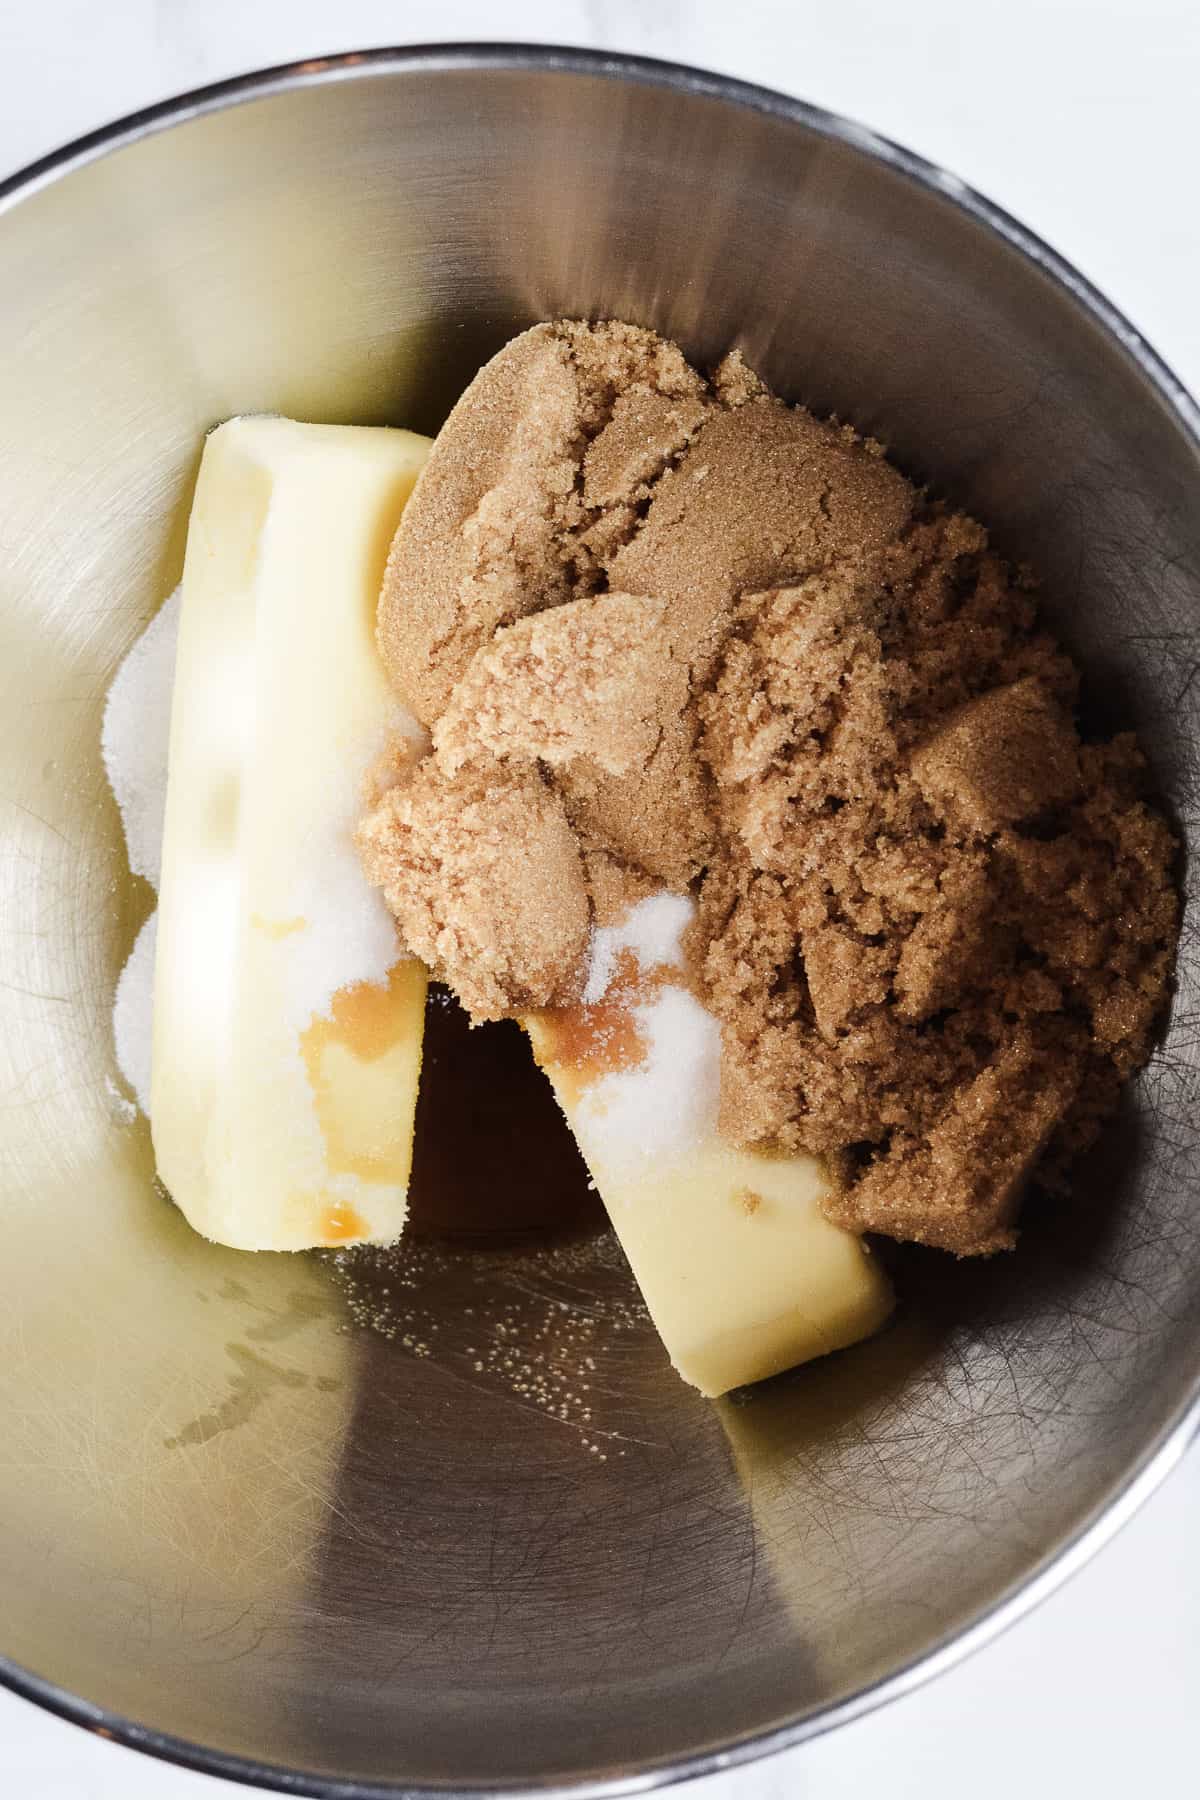 Cookie dough ingredients in mixing bowl. Butter, brown sugar, sugar and vanilla extract.